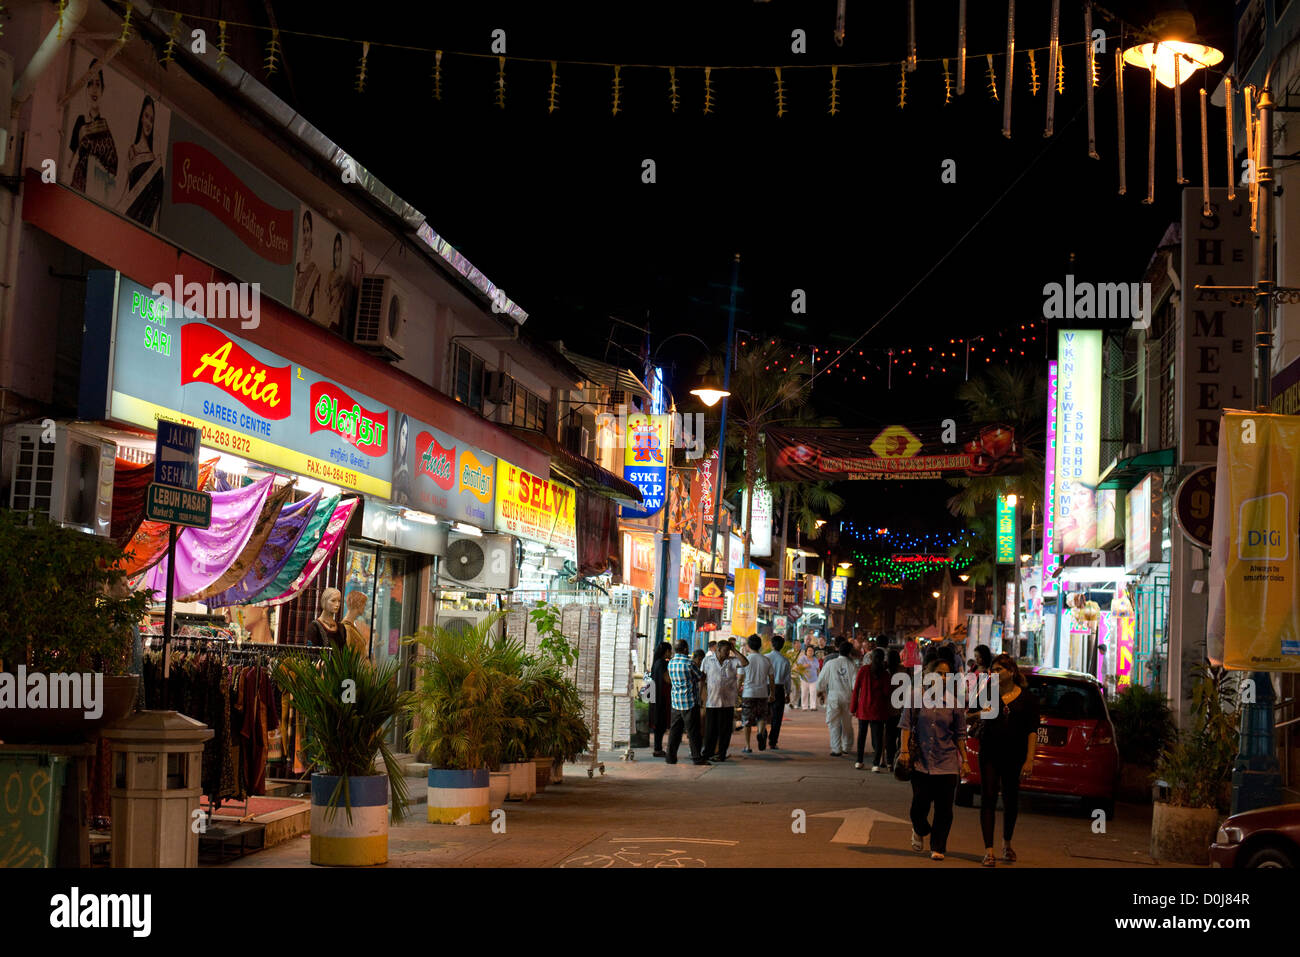 A night time street scene in Georgetown's Little India district in Penang, Malaysia Stock Photo